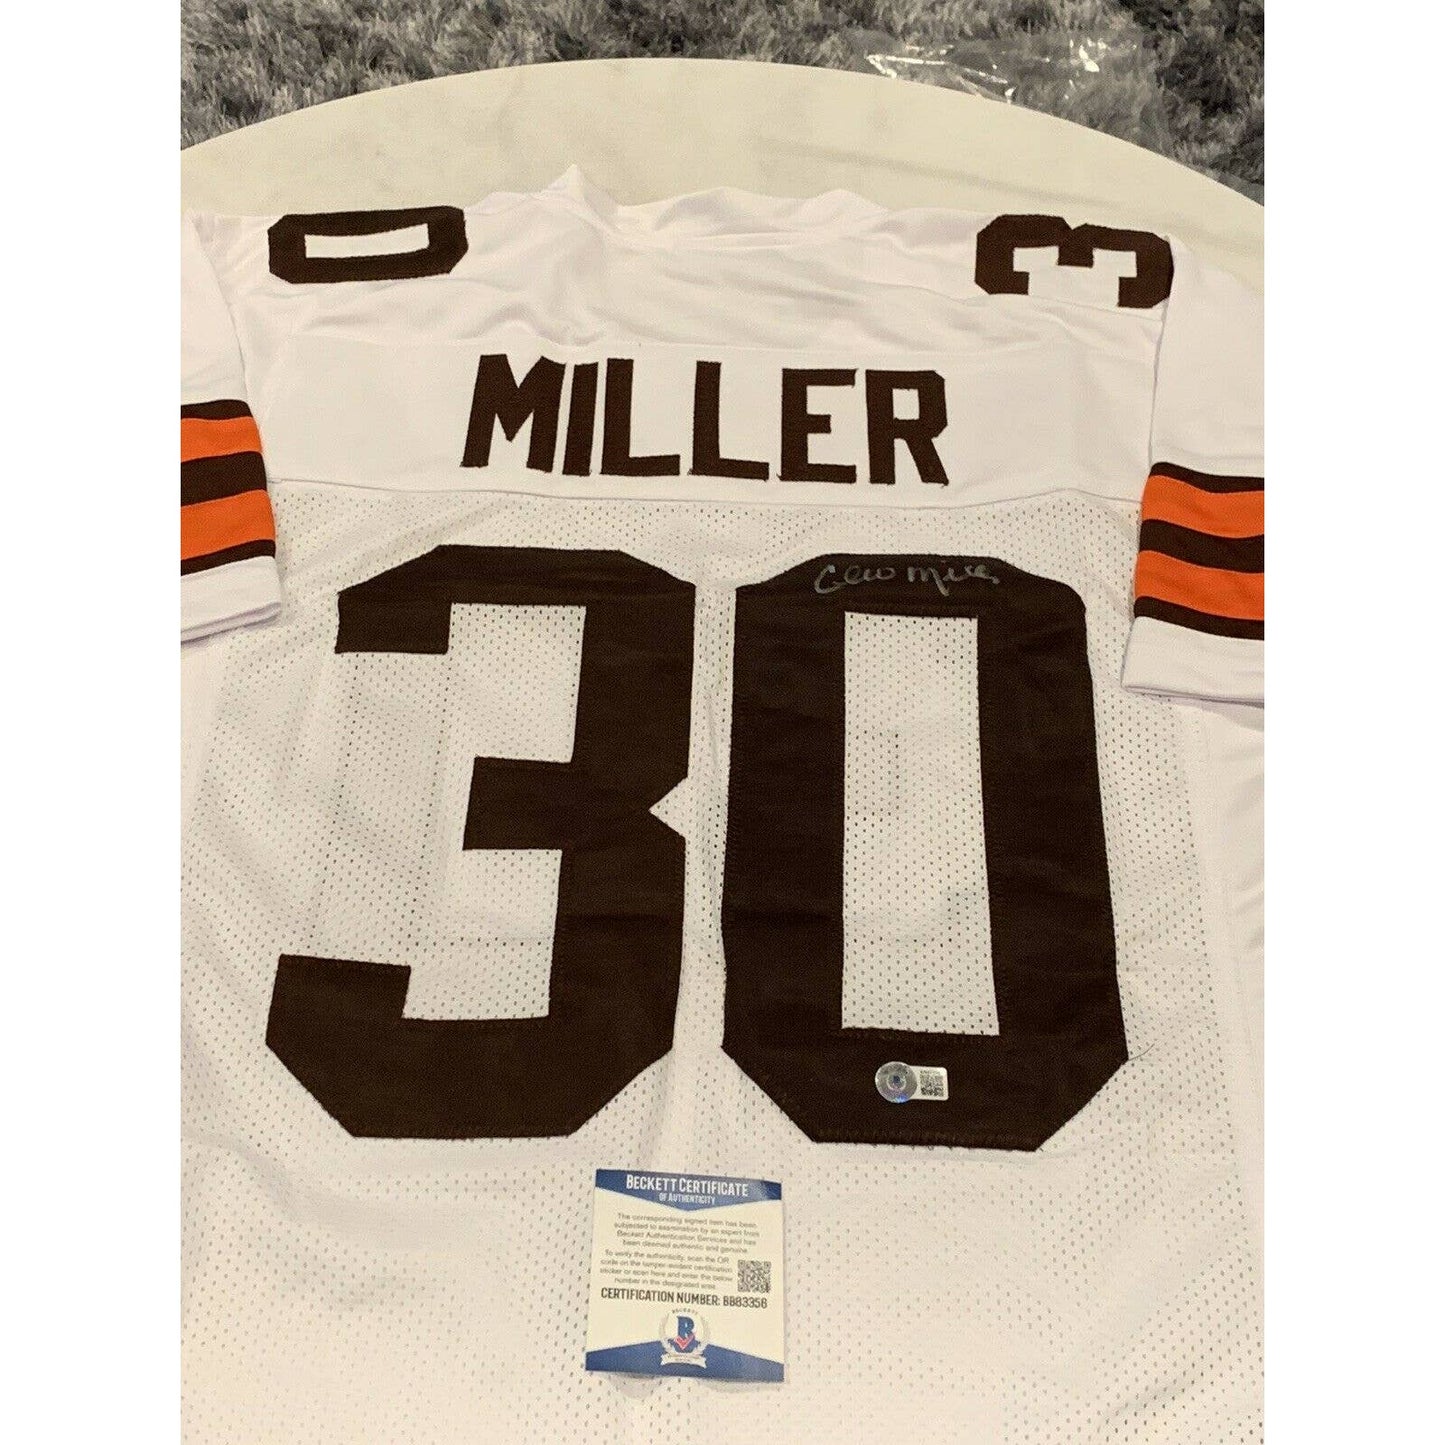 Cleo Miller Autographed/Signed Jersey Beckett COA Cleveland Browns - TreasuresEvolved